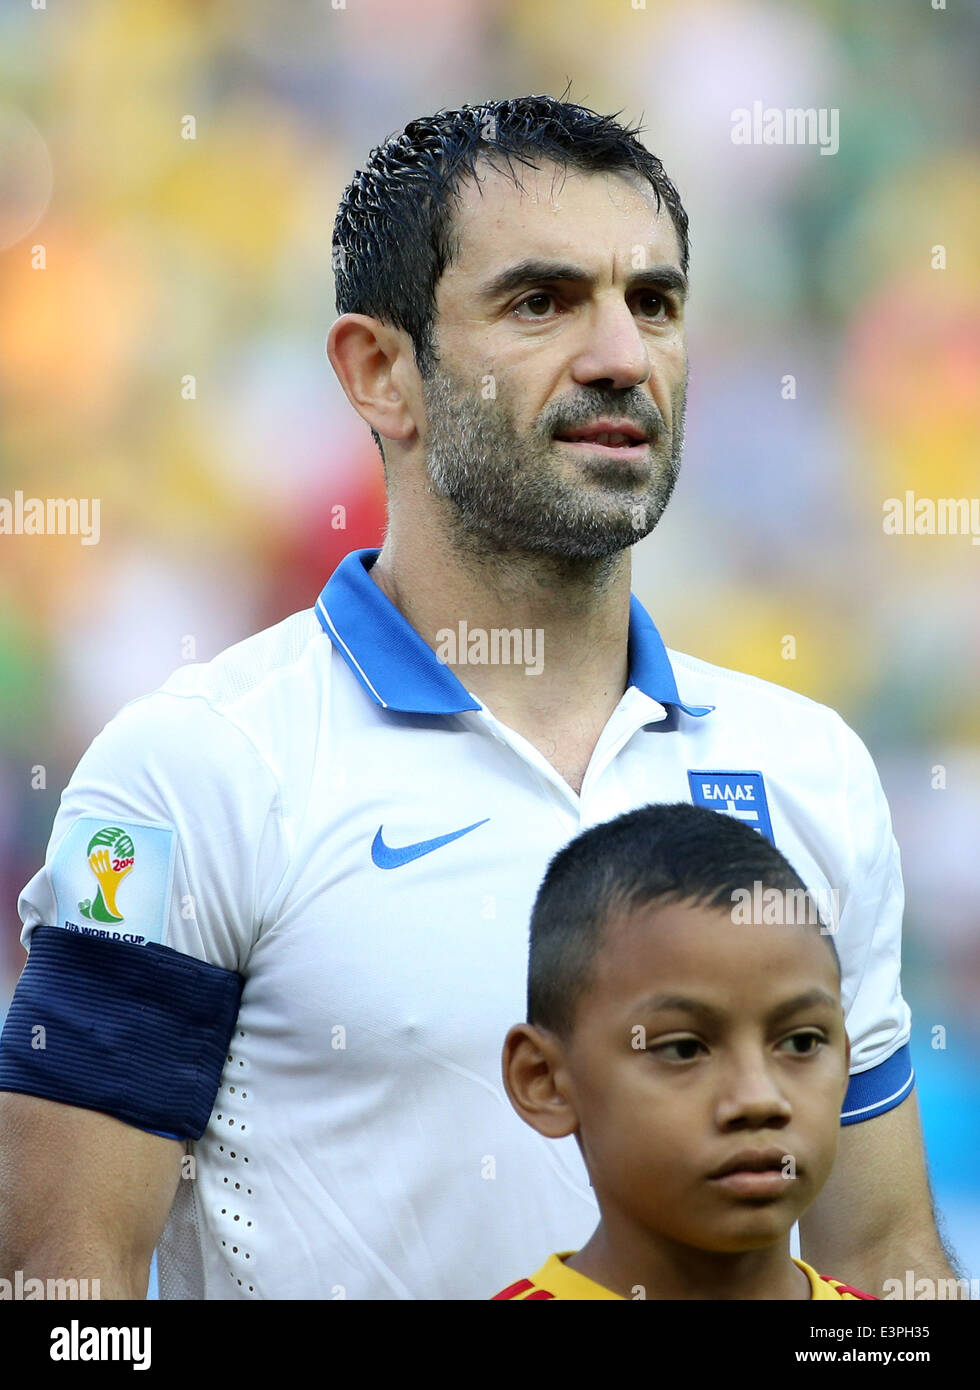 (140624) -- FORTALEZA, June 24, 2014 (Xinhua) -- Greece's captain Giorgos Karagounis is seen prior to a Group C match between Greece and Cote d'Ivoire of 2014 FIFA World Cup at the Estadio Castelao Stadium in Fortaleza, Brazil, June 24, 2014. Greece won 2-1 over Cote d'Ivoire on Tuesday. (Xinhua/Cao Can)(xzj) Stock Photo